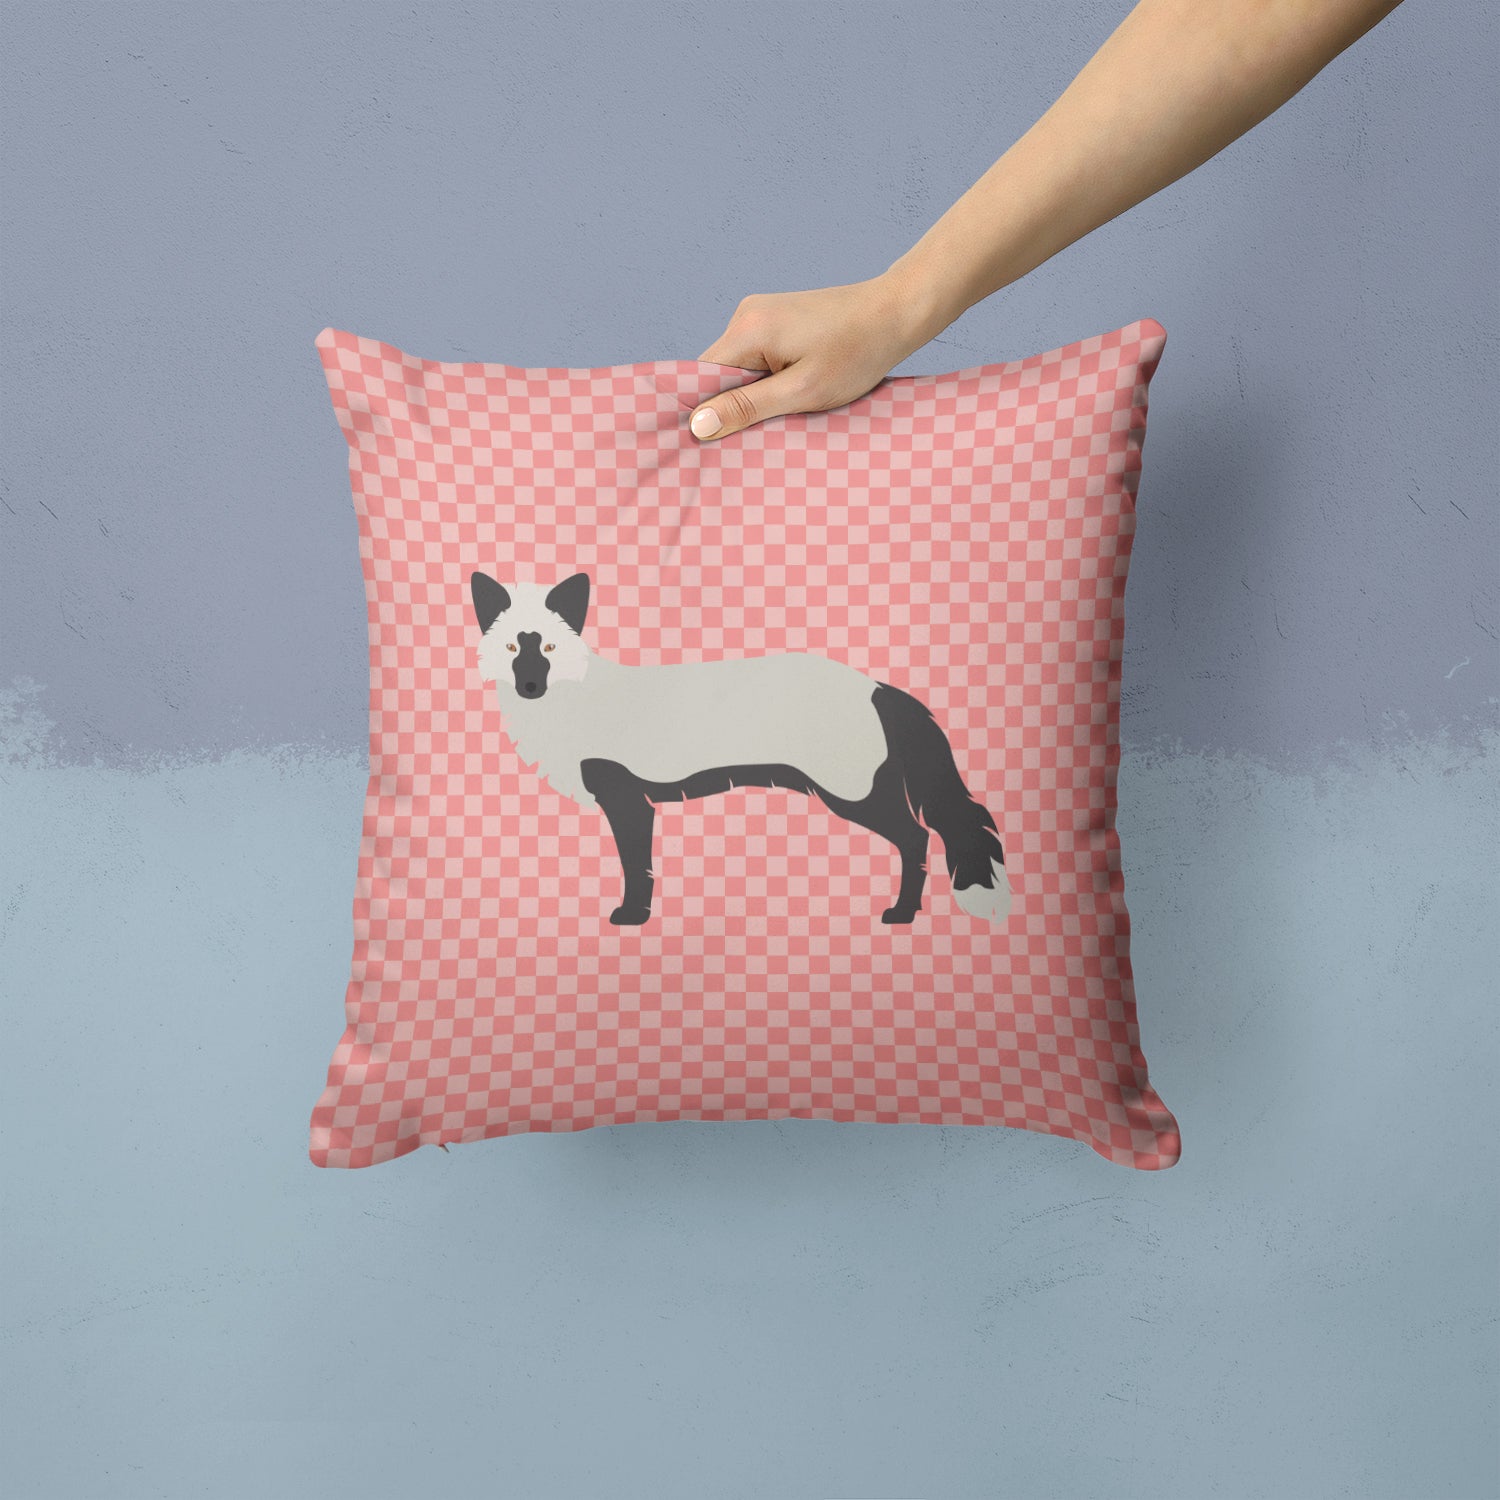 Silver Fox Pink Check Fabric Decorative Pillow BB7871PW1414 - the-store.com